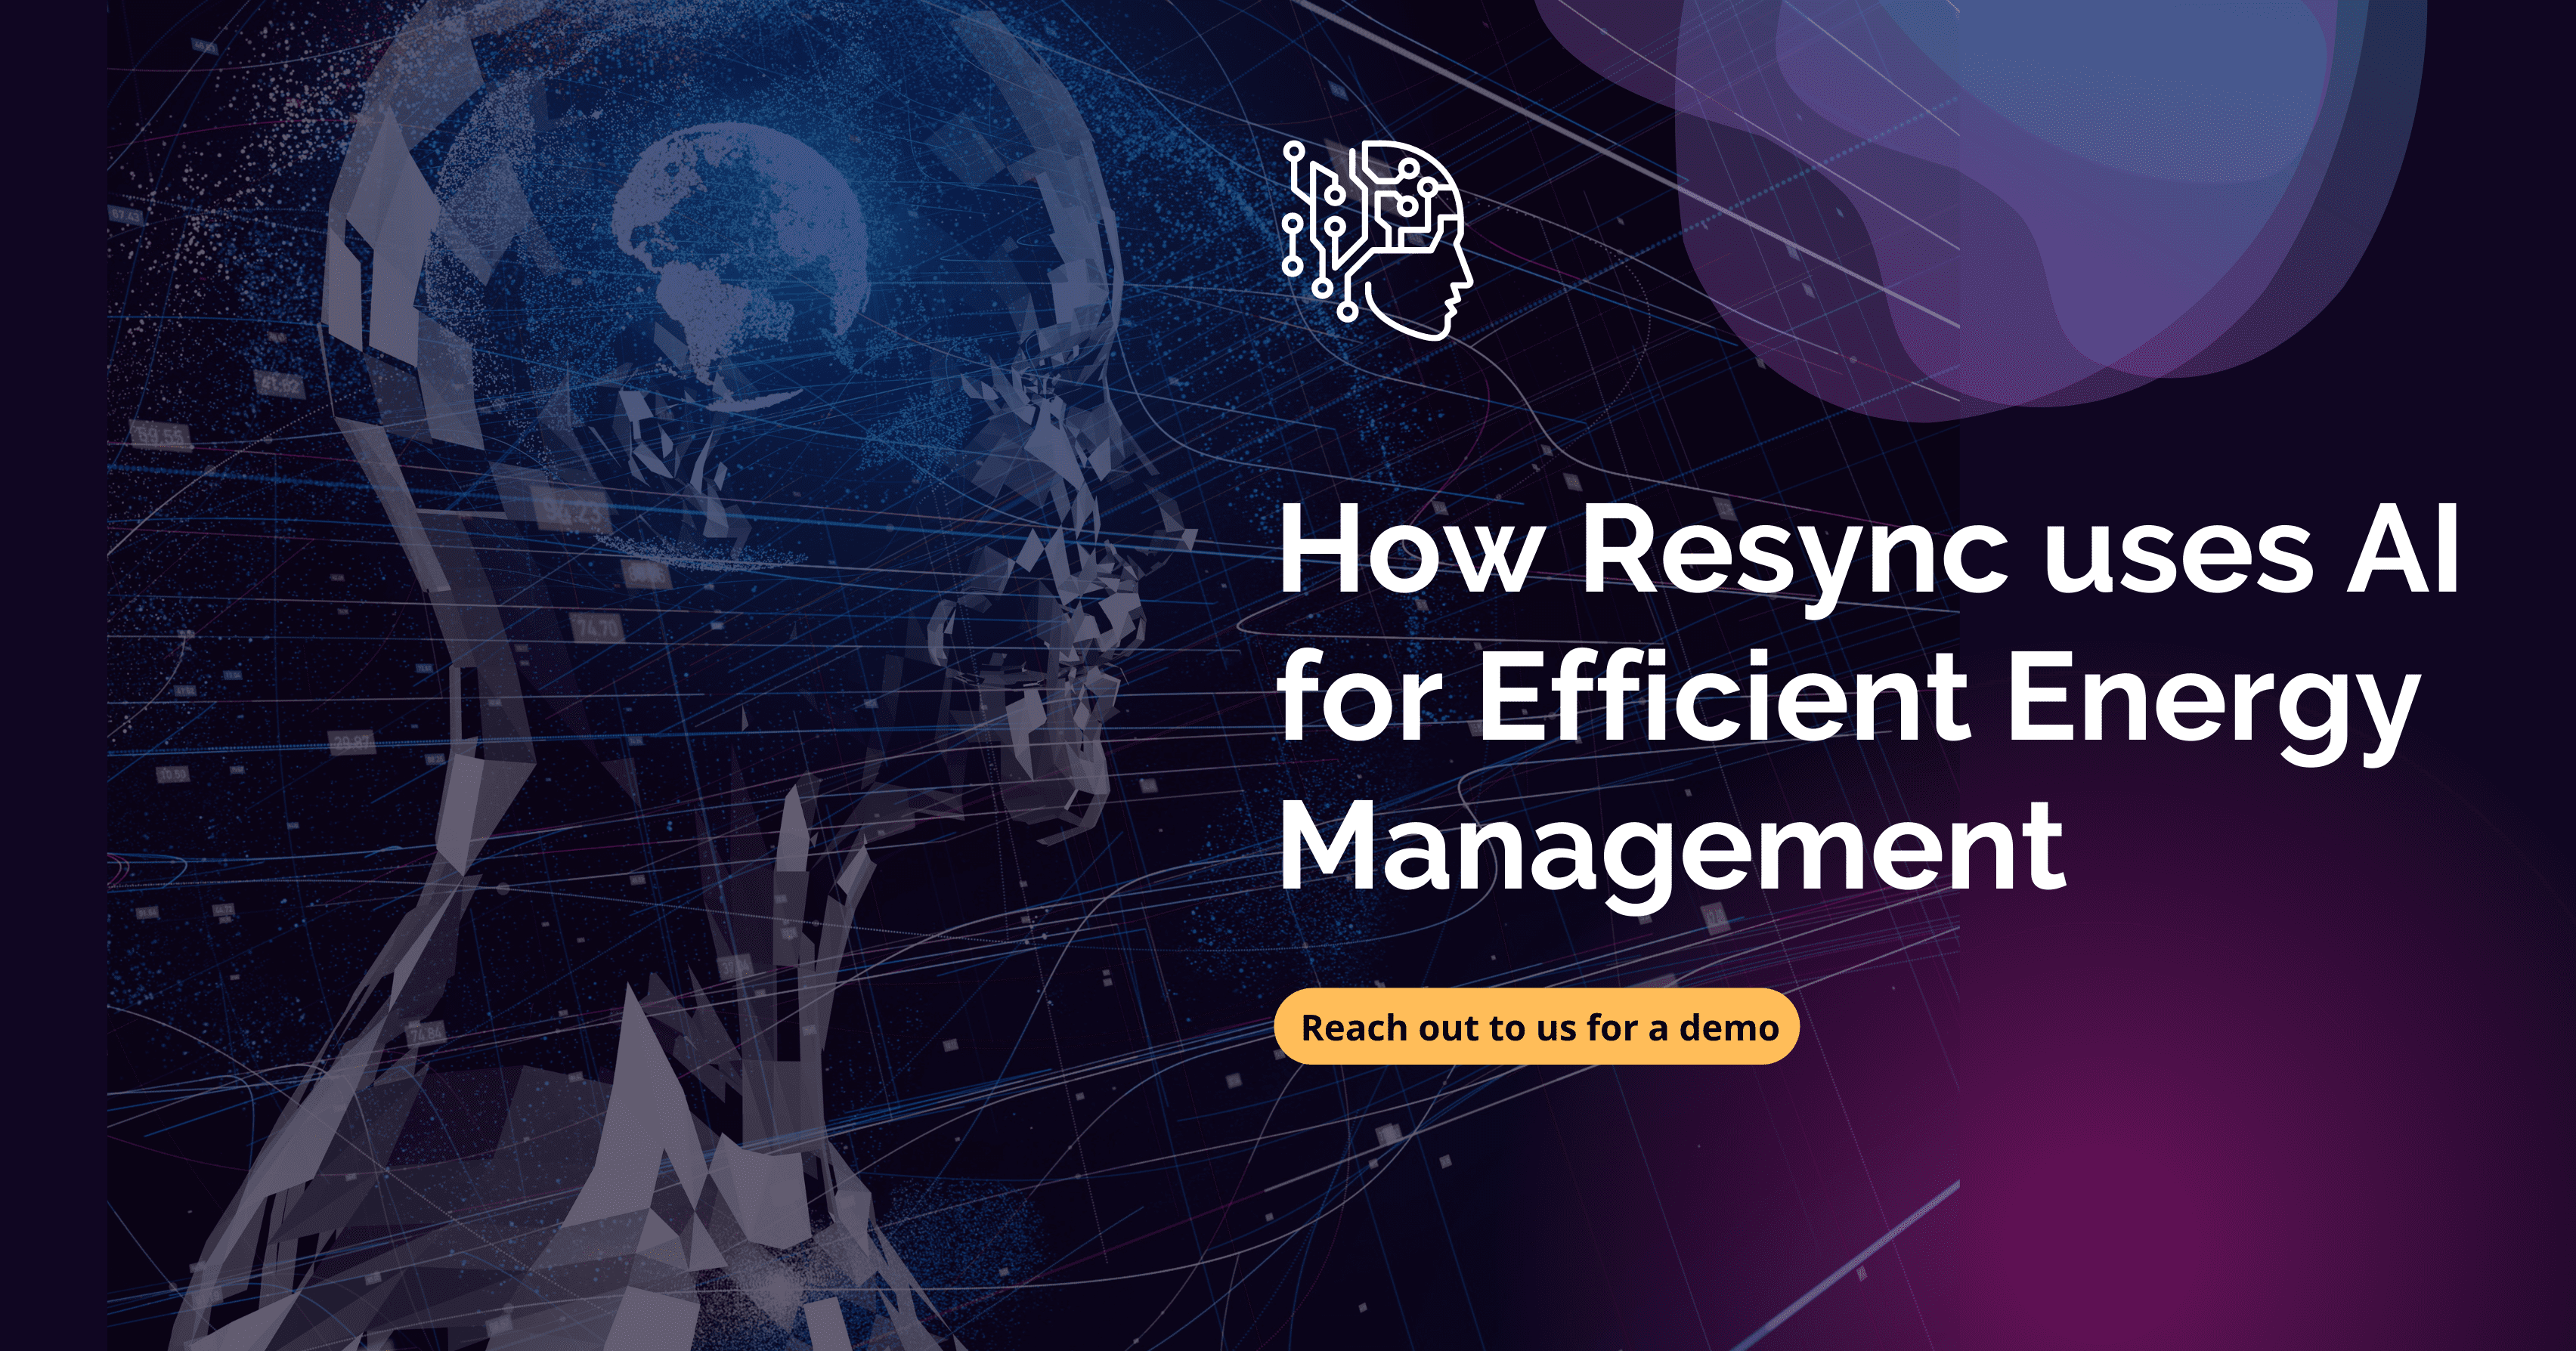 How Resync Uses AI for Efficient Energy Management